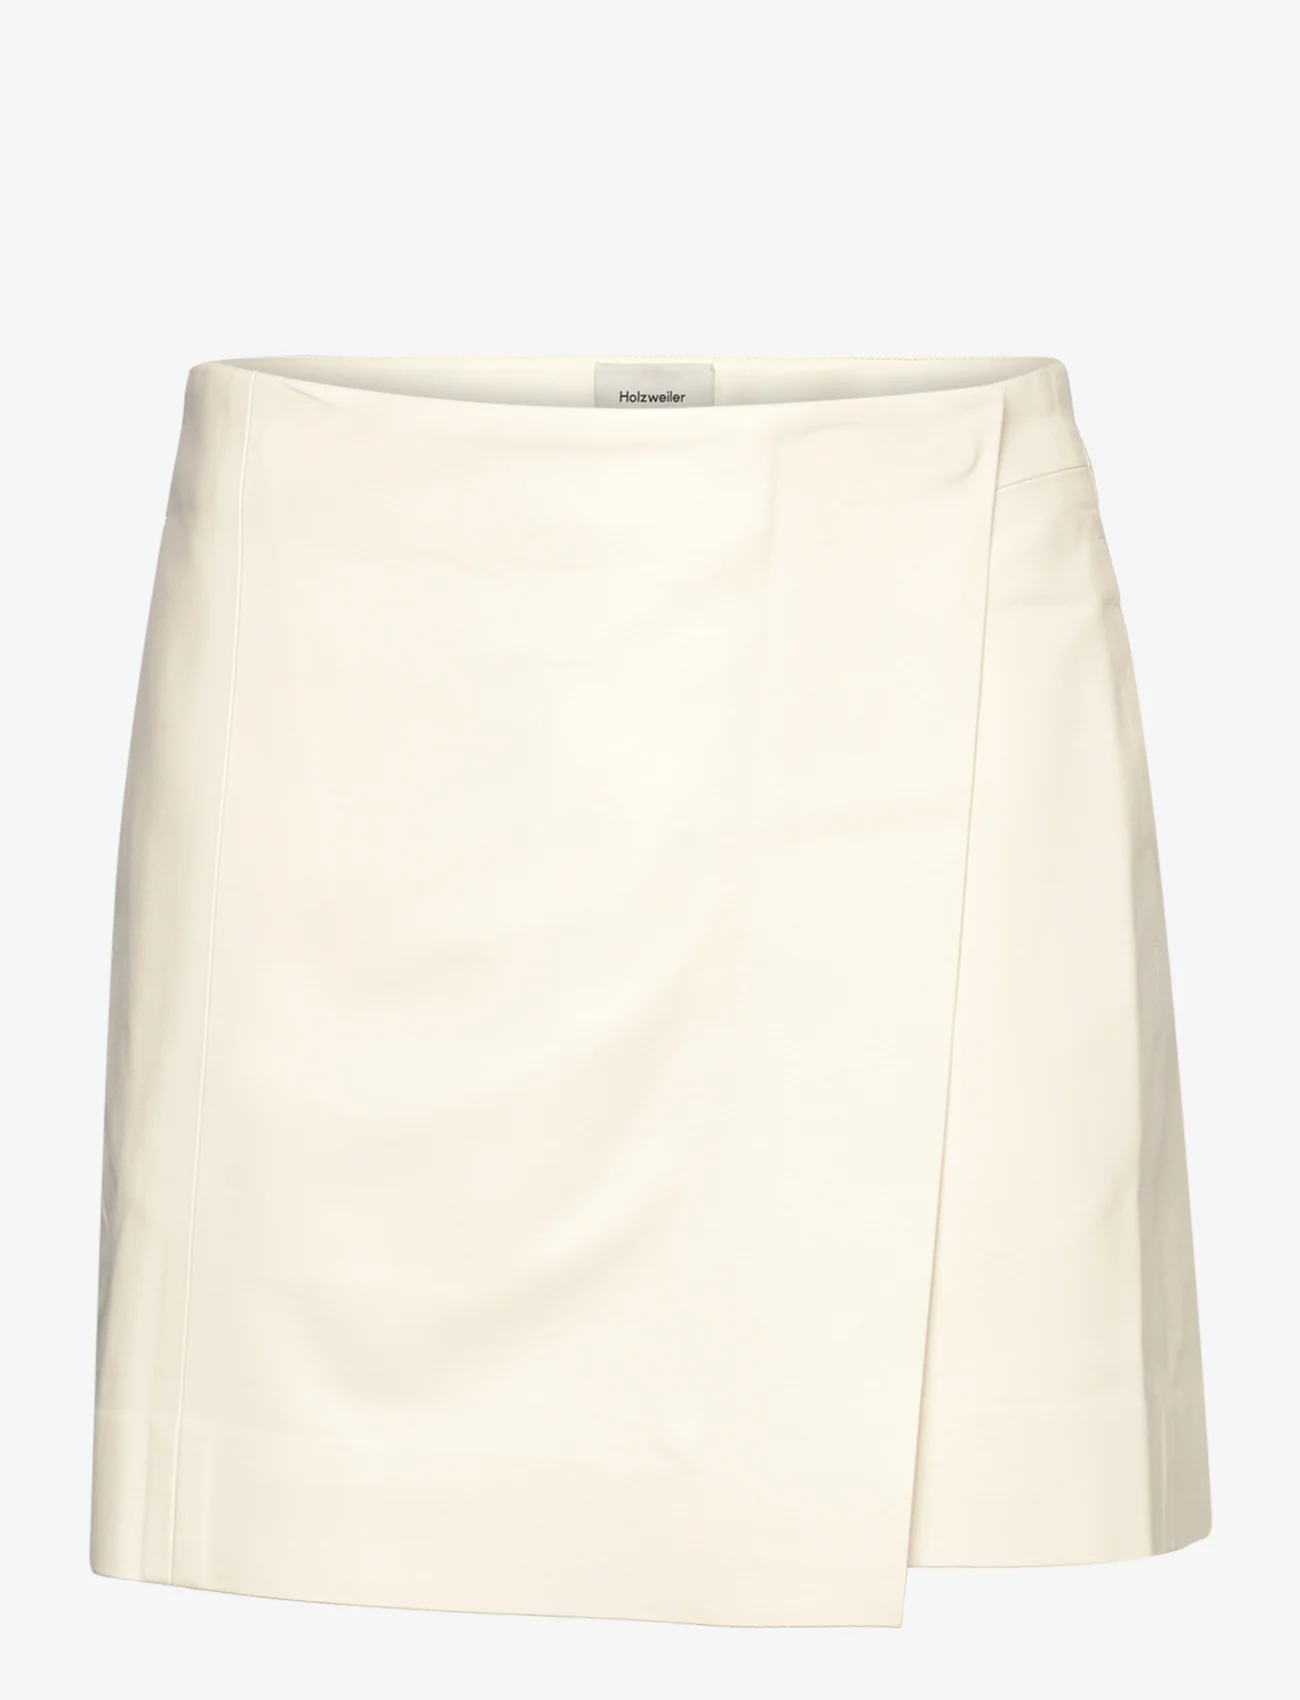 HOLZWEILER - Erina Skirt - party wear at outlet prices - white - 0